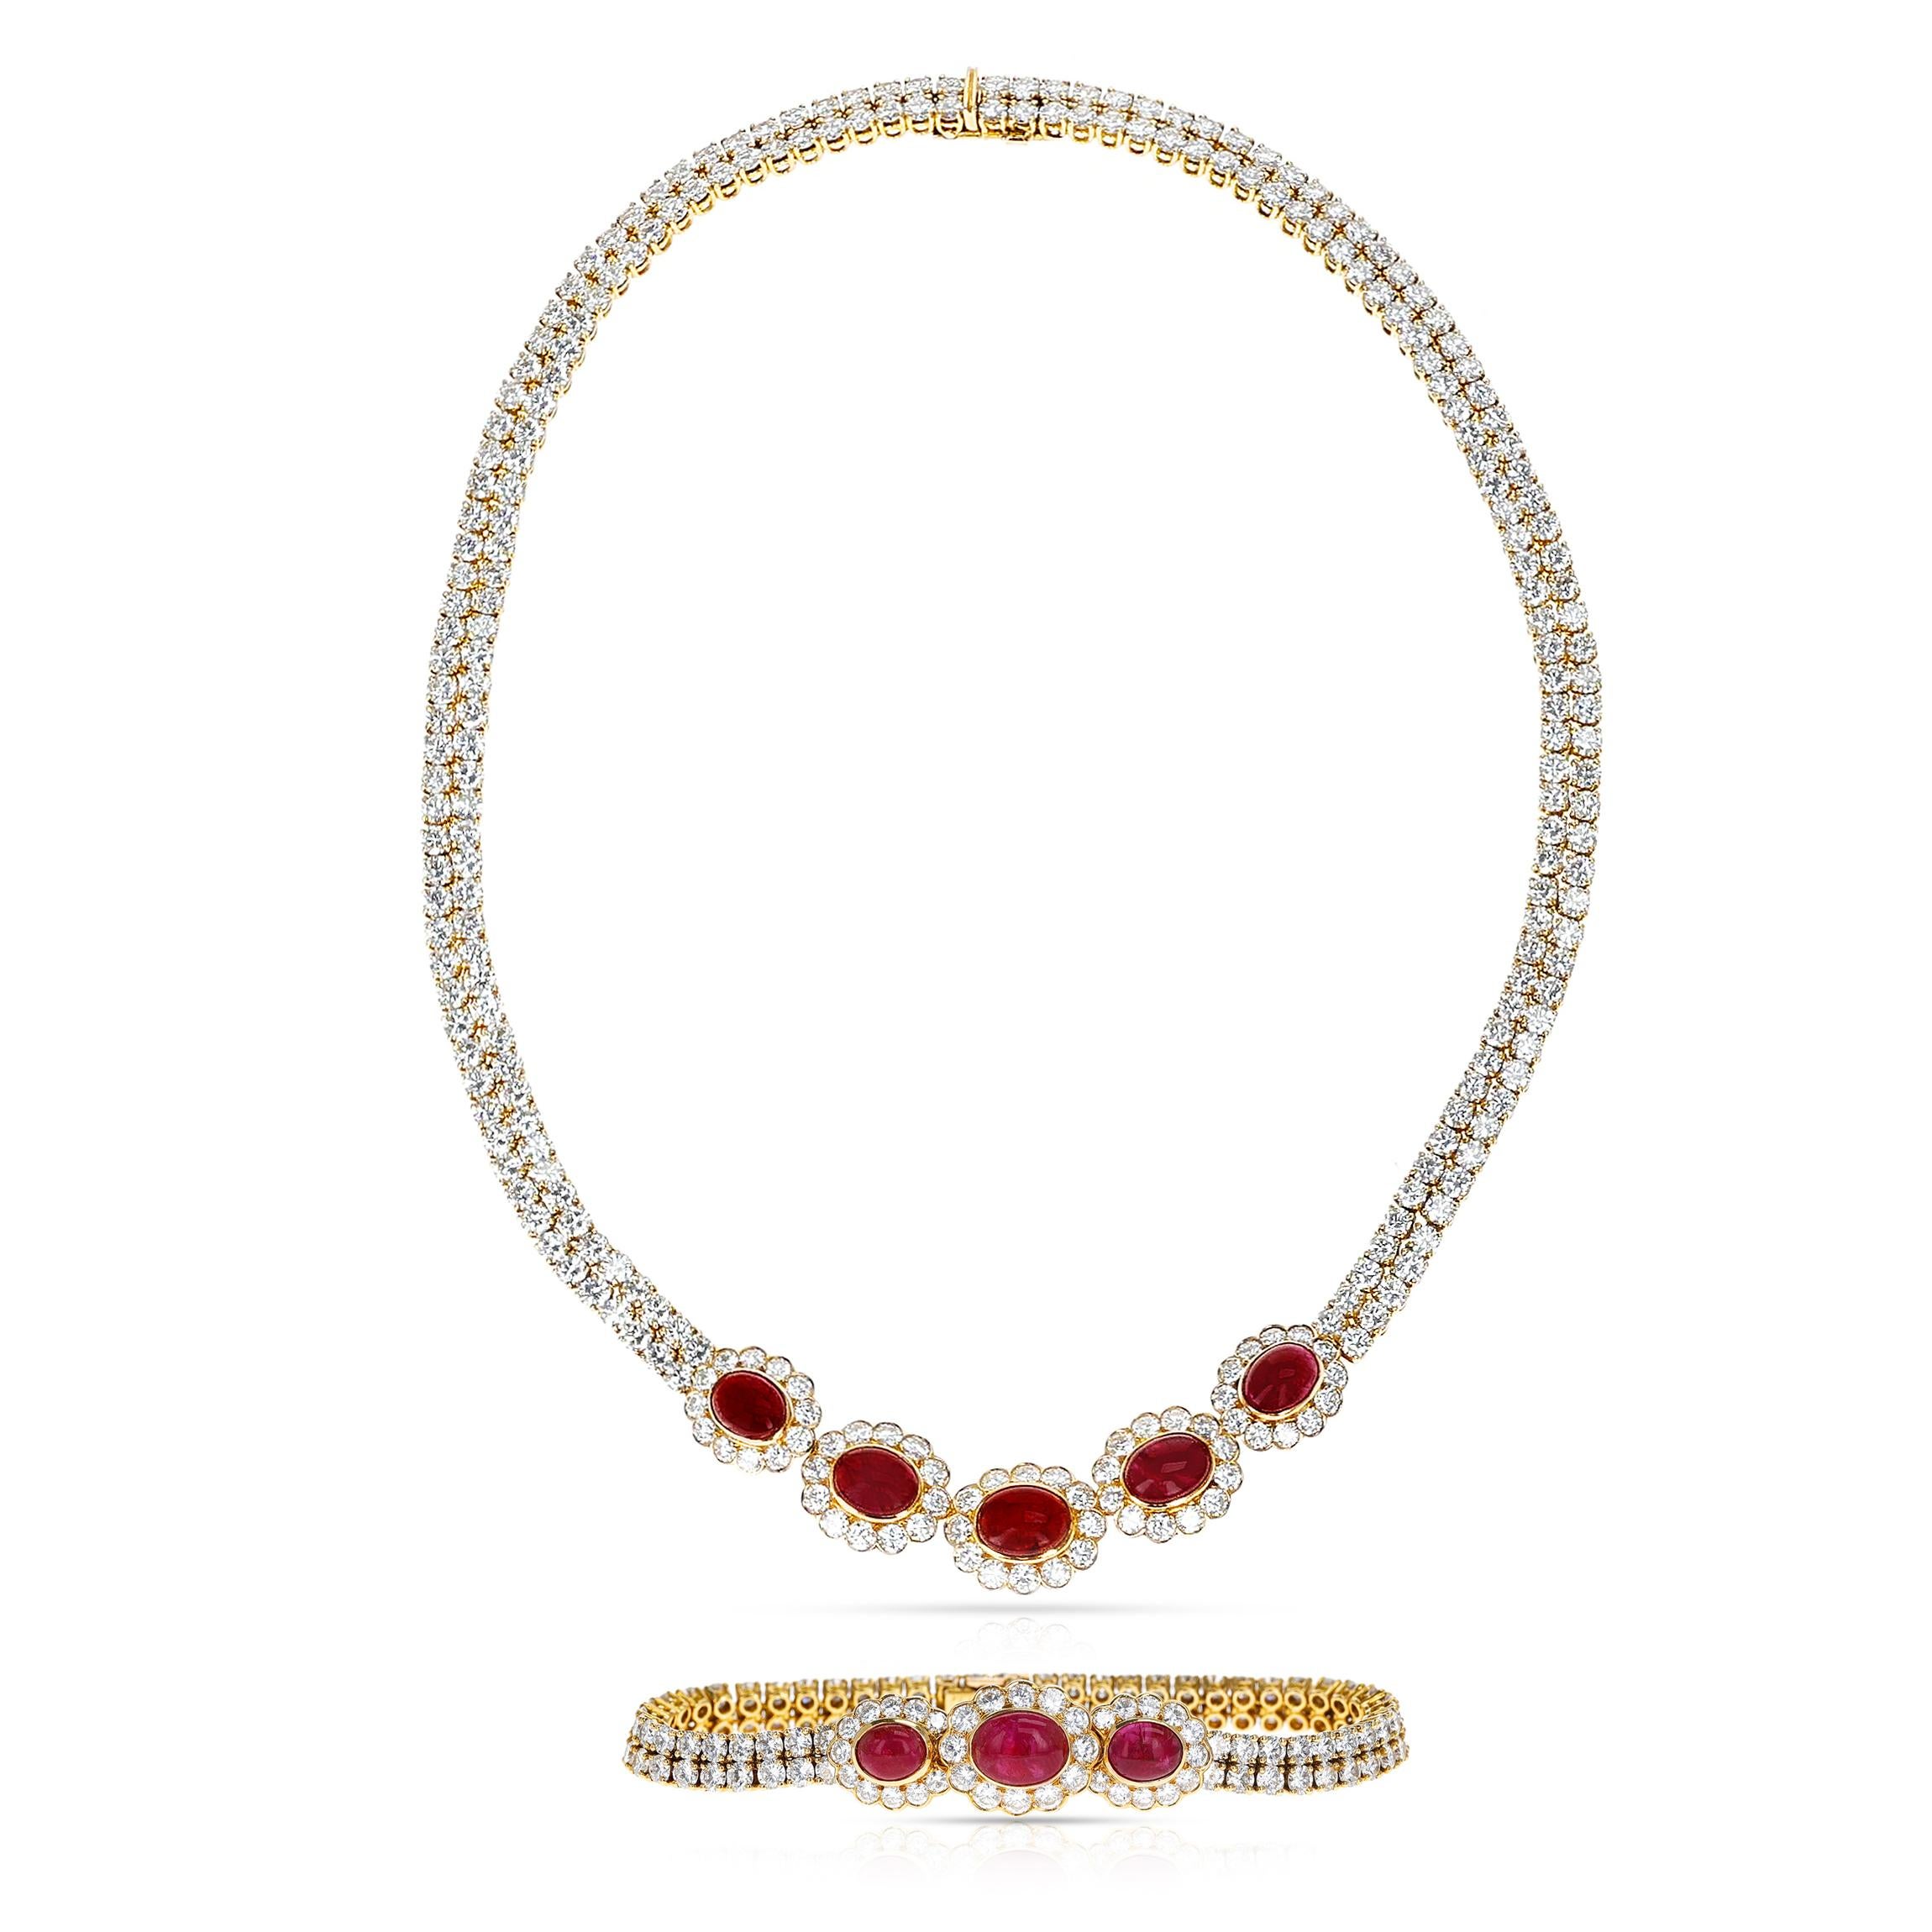 Van Cleef & Arpels Ruby Cabochon and Diamond Bracelet and Necklace Set, 18k For Sale 3